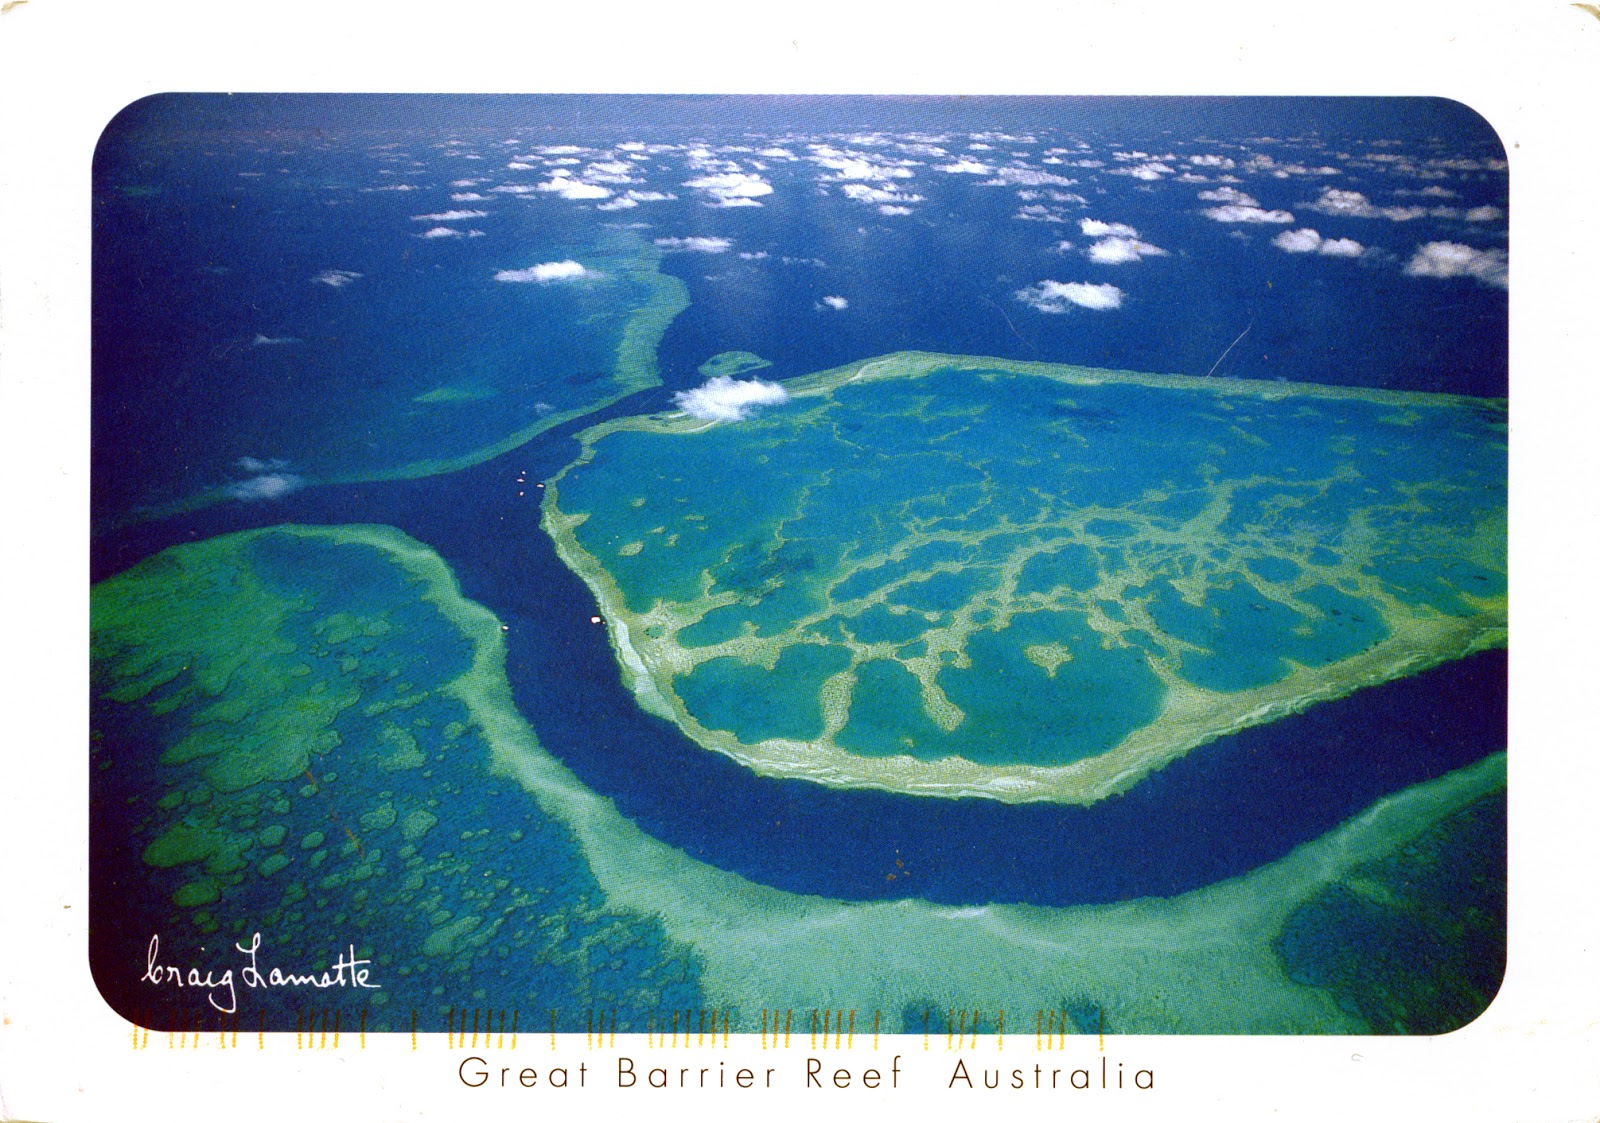 what is the biggest single structure made by organisms and how large is the great barrier reef in australia